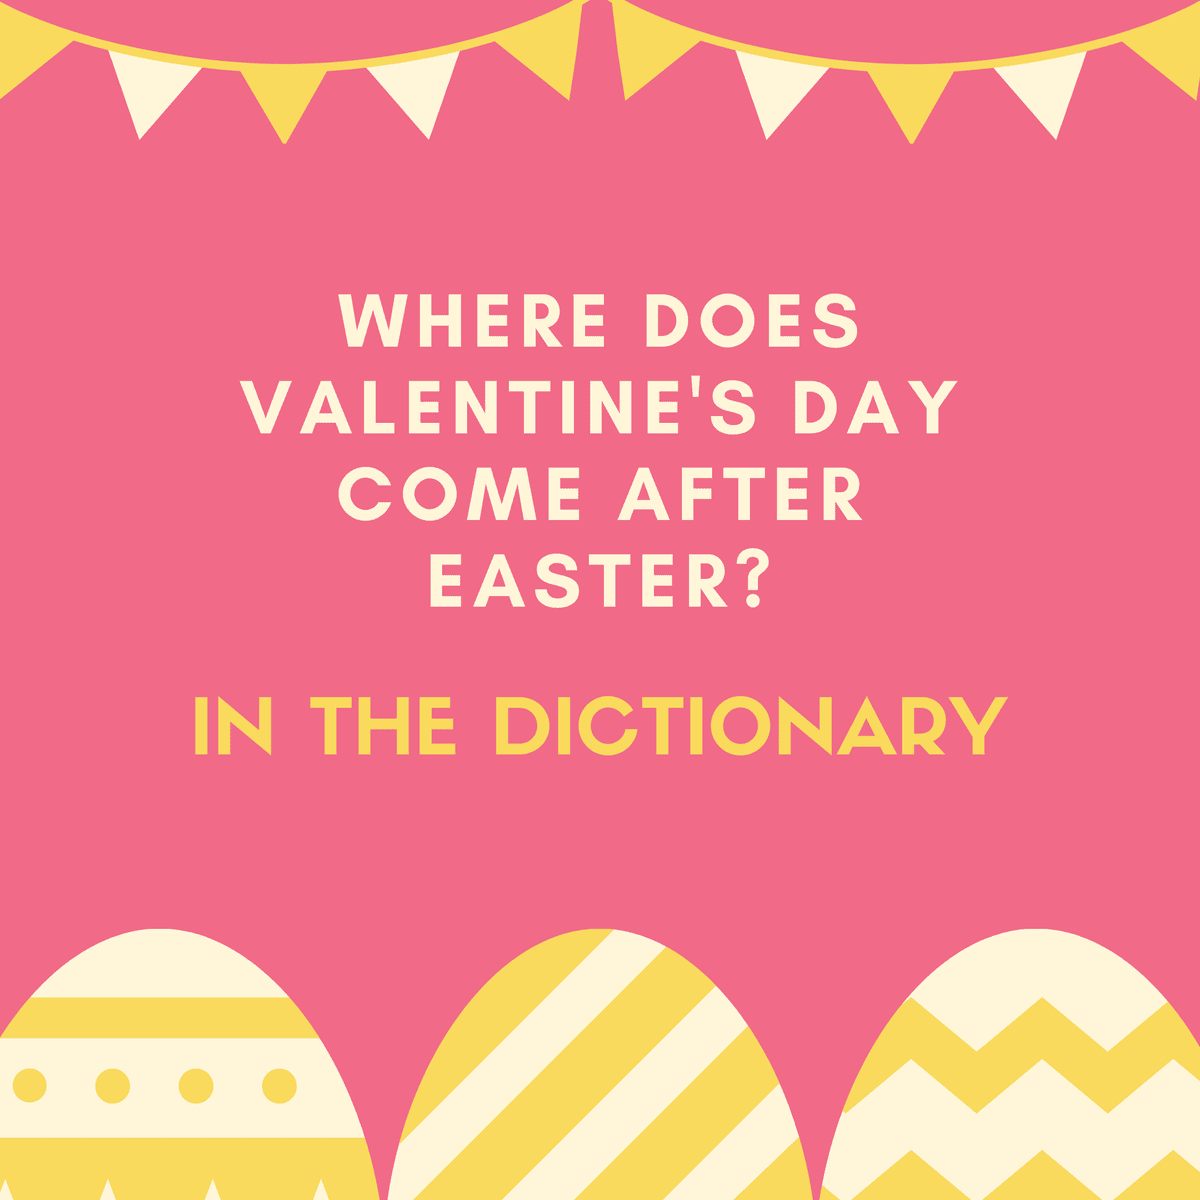 Where does Valentine's Day come after Easter? In the dictionary